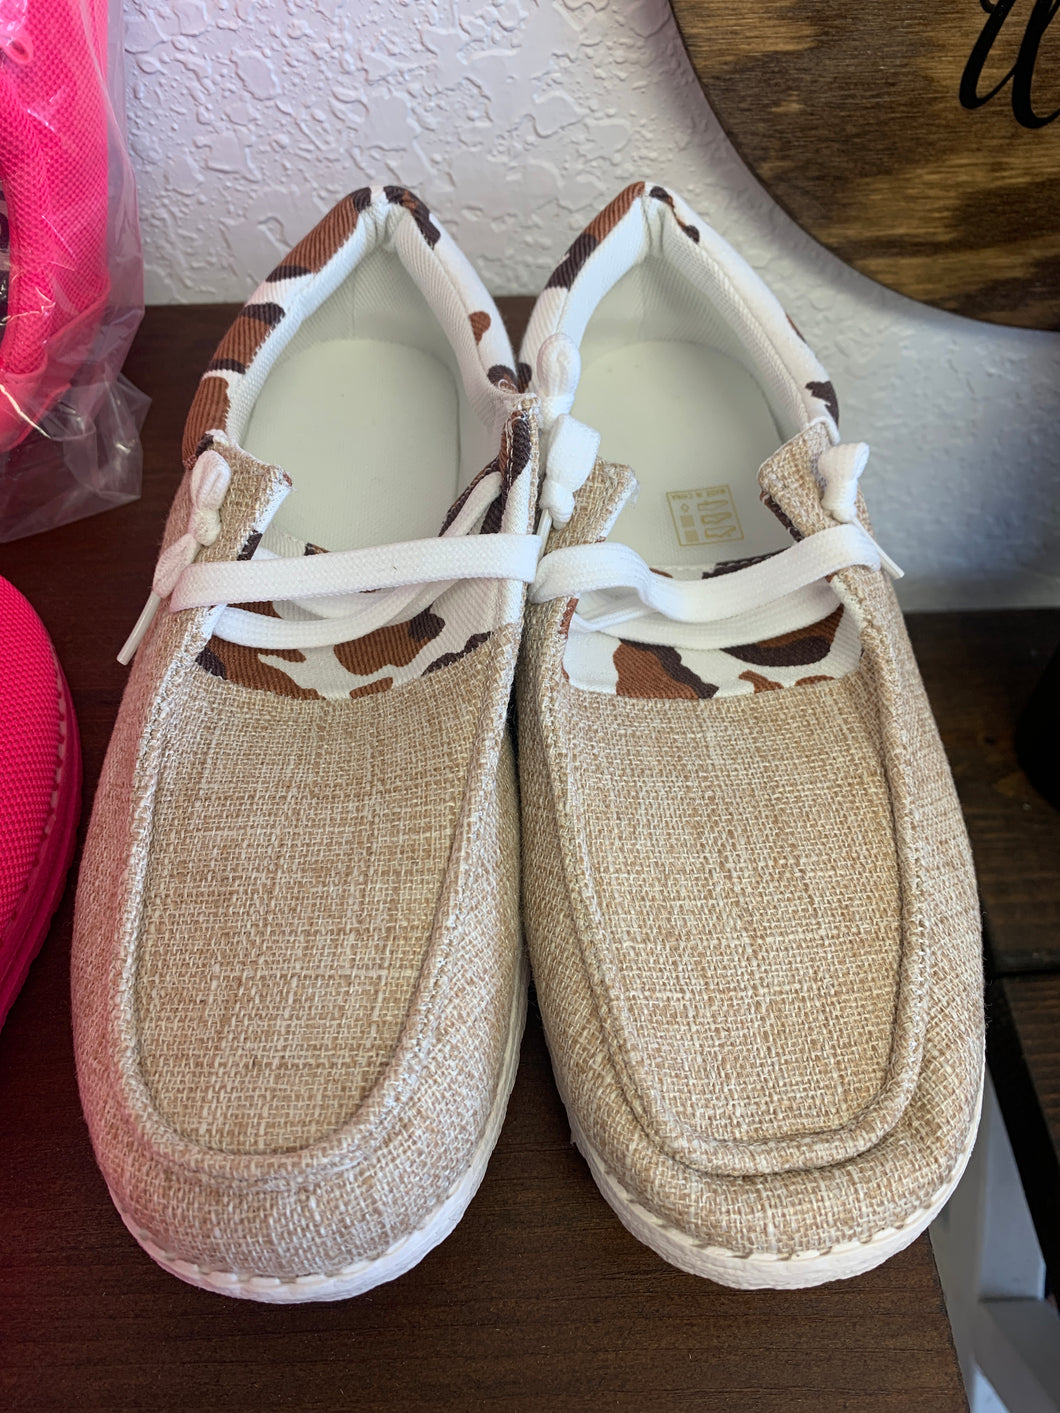 Tan and cow print slip on shoes